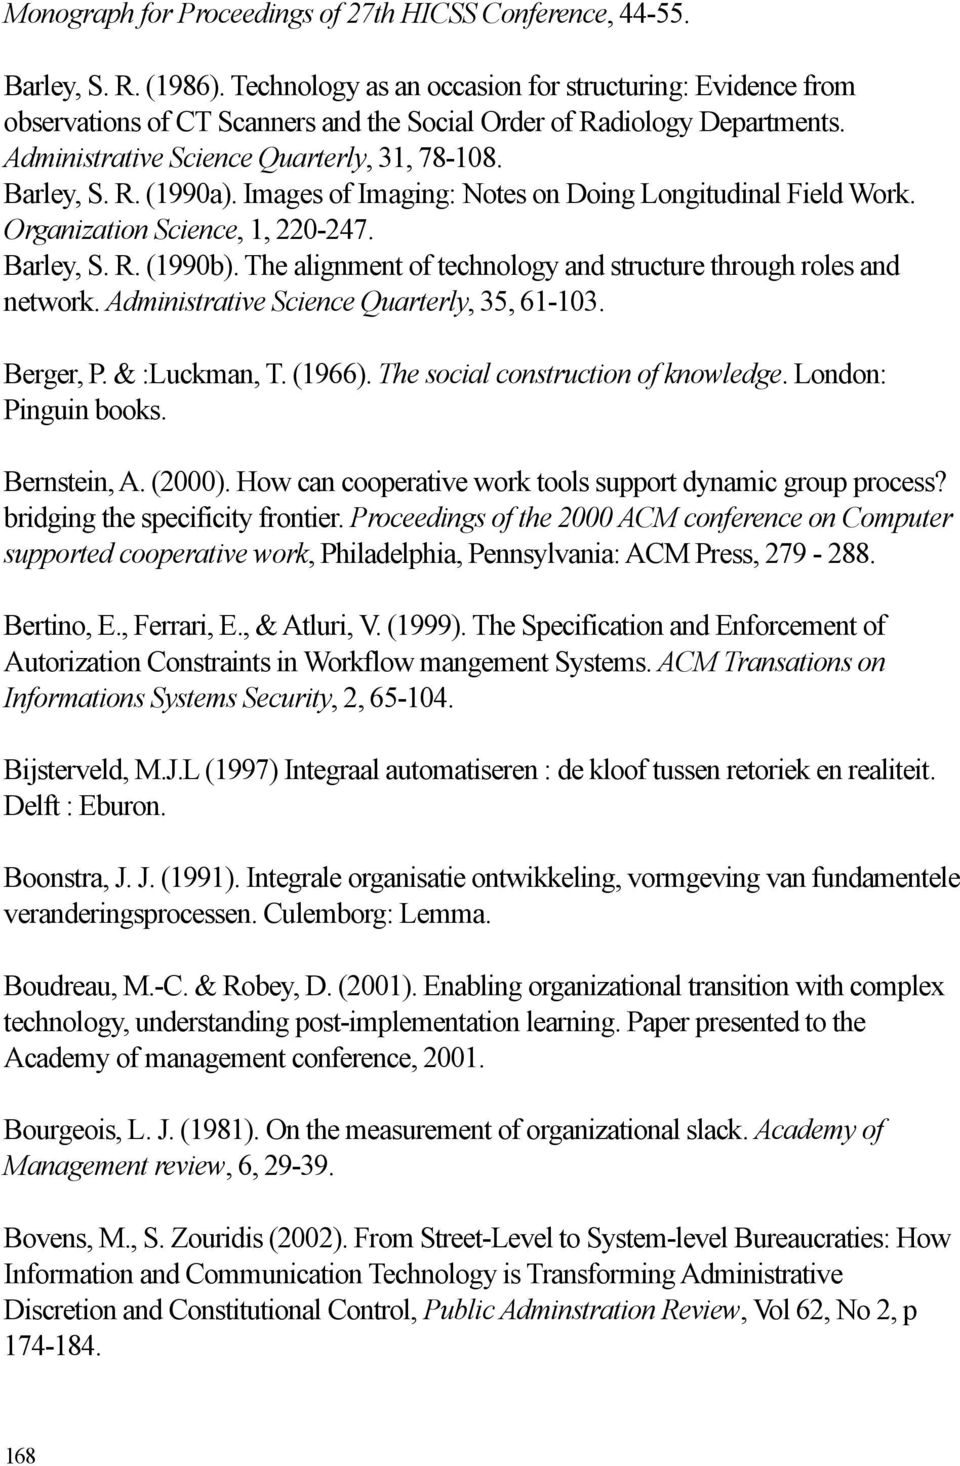 Images of Imaging: Notes on Doing Longitudinal Field Work. Organization Science, 1, 220-247. Barley, S. R. (1990b). The alignment of technology and structure through roles and network.